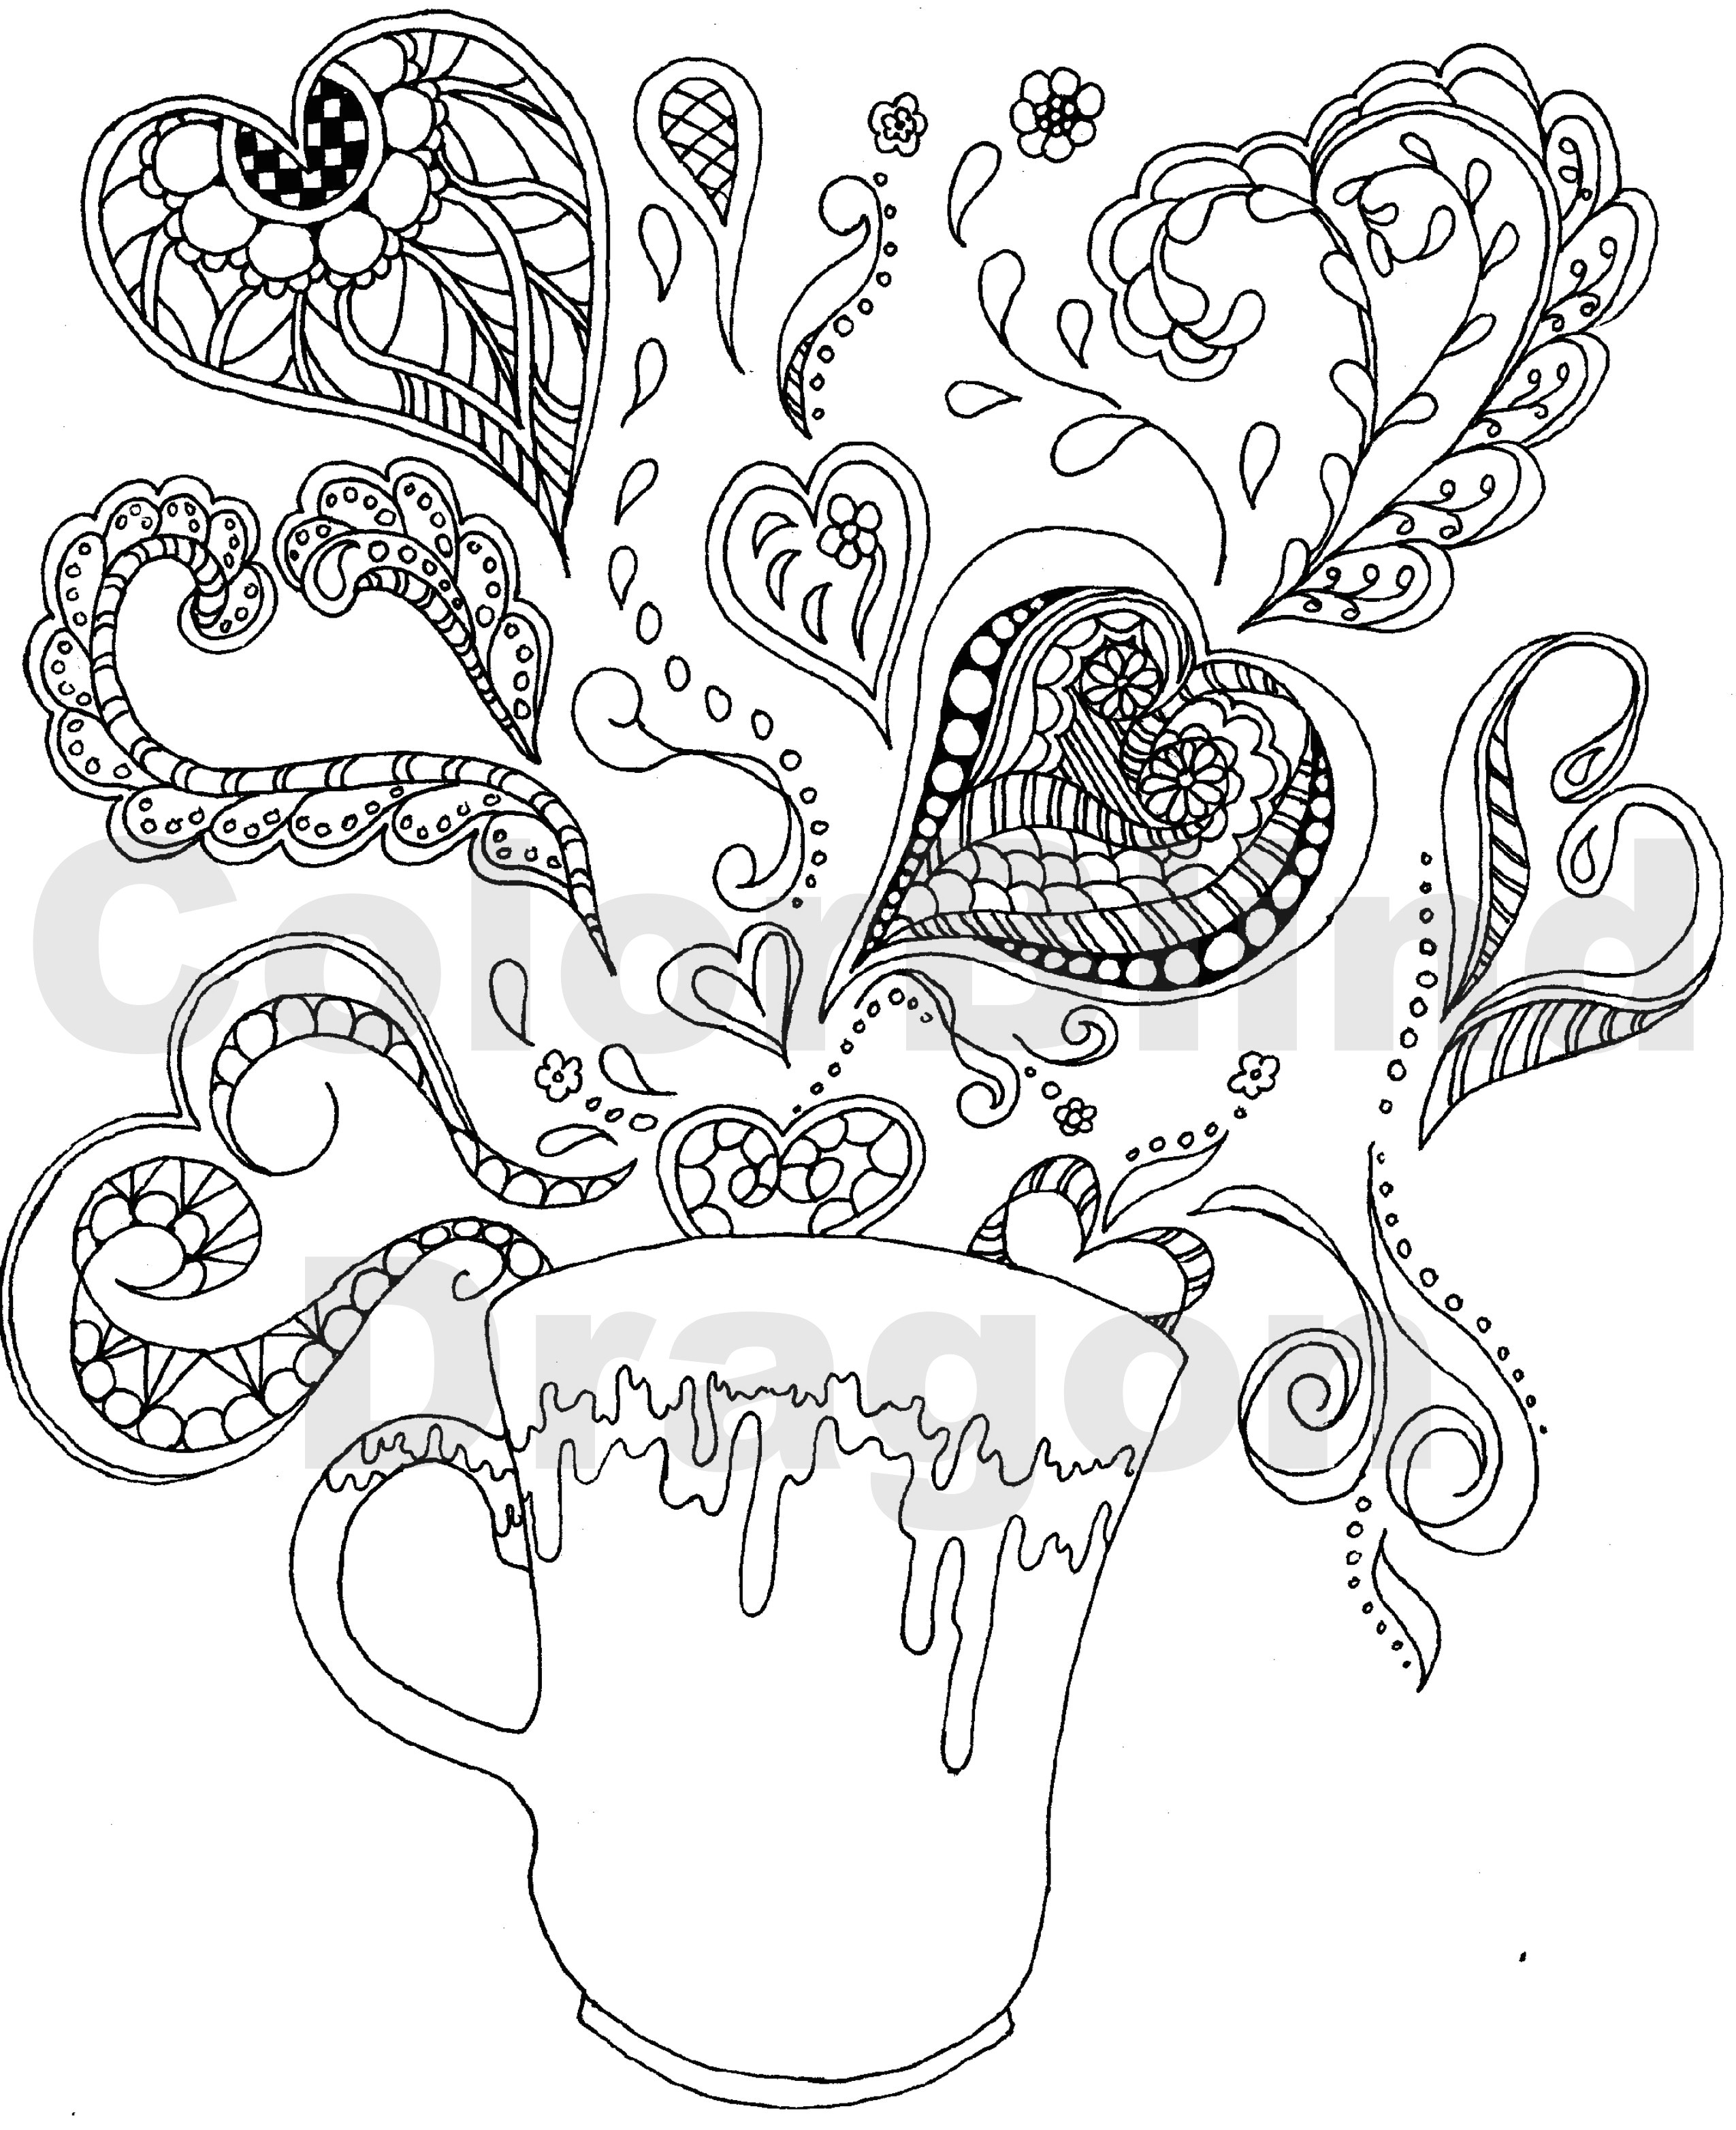 Easy Drawings for Boys Simple Drawings for Boys Unique Coloring Pages Simple Ghost Drawing